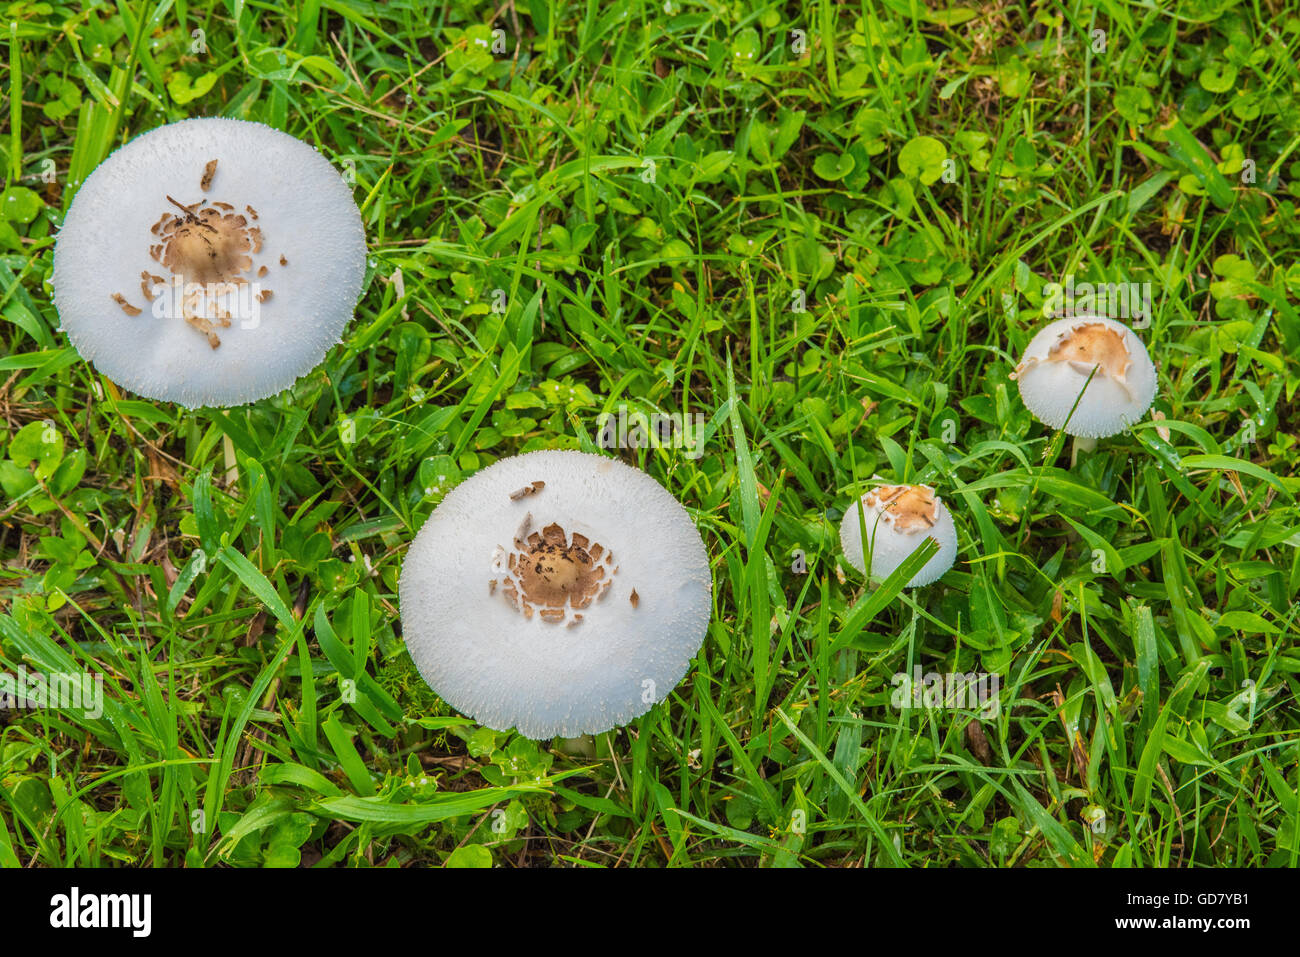 Mushrooms growing in green lawn in Plant City Florida Stock Photo